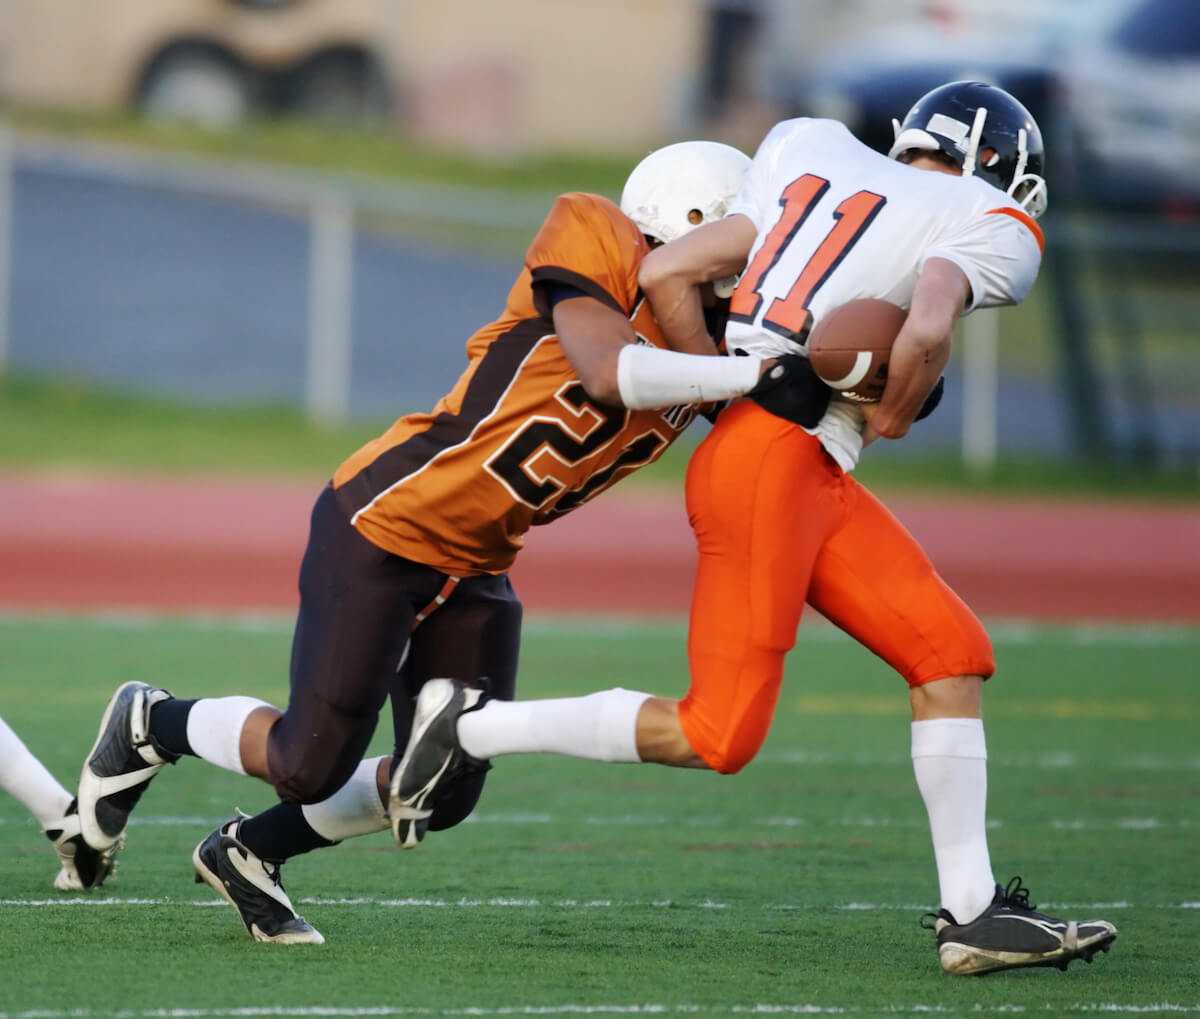 Football player tackling another player